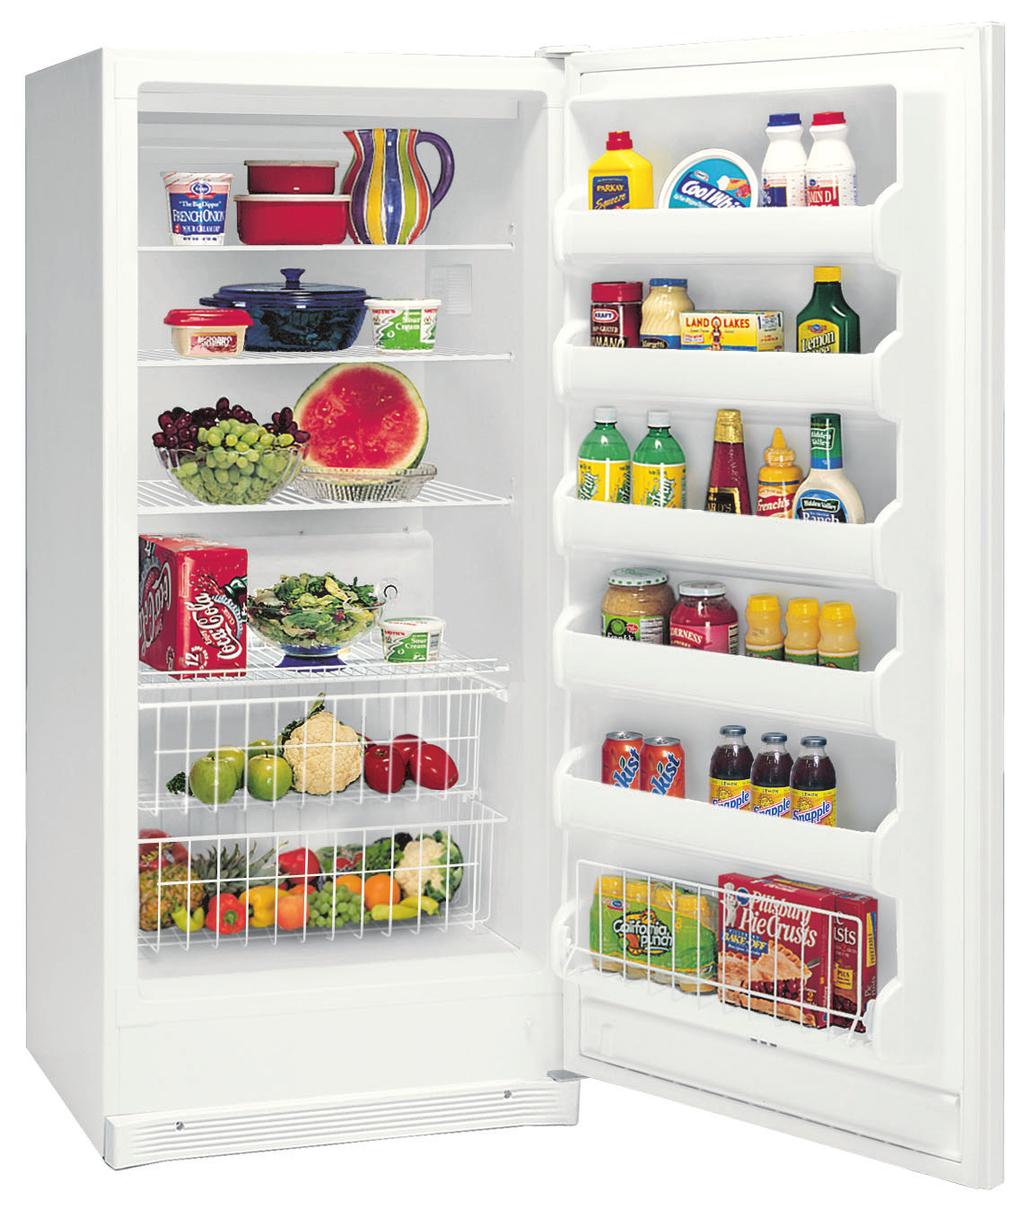 In addition to the larger capacity, this model features Adjustable Wire Shelves, Extra-Large Door Bins, Full-Width Sliding